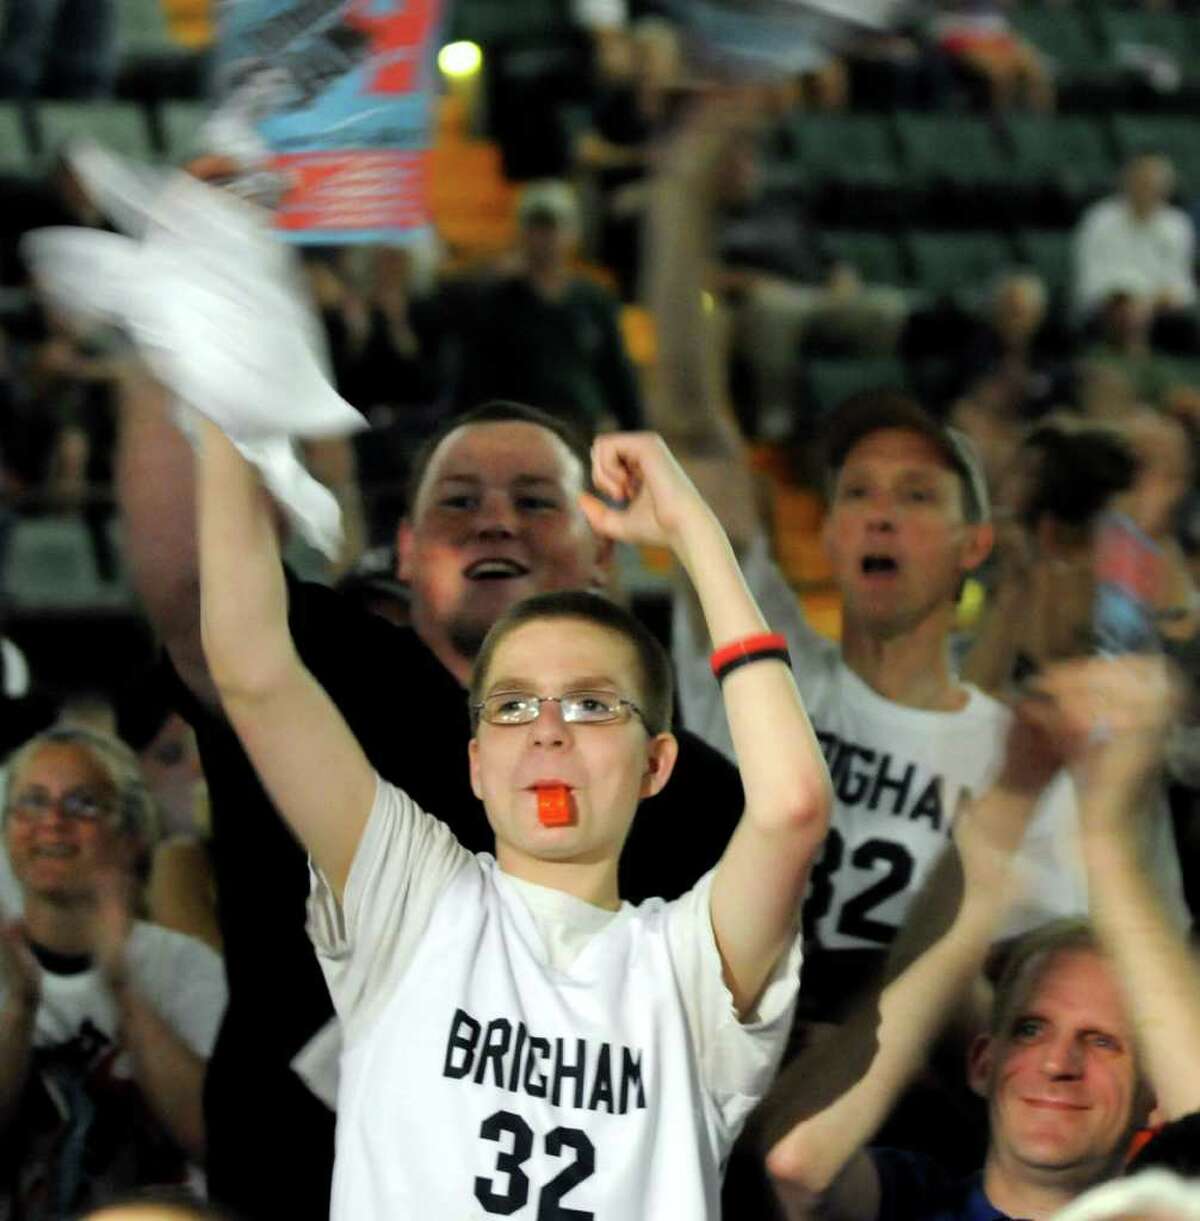 Patrick Oleksiak, 14, of Scotia, center, cheers as Milwaukee selects Jimmer Fredette during the NBA draft on Thursday, June 23, 2011, at the Glens Falls Civic Center in Glens Falls, N.Y. (Cindy Schultz / Times Union)